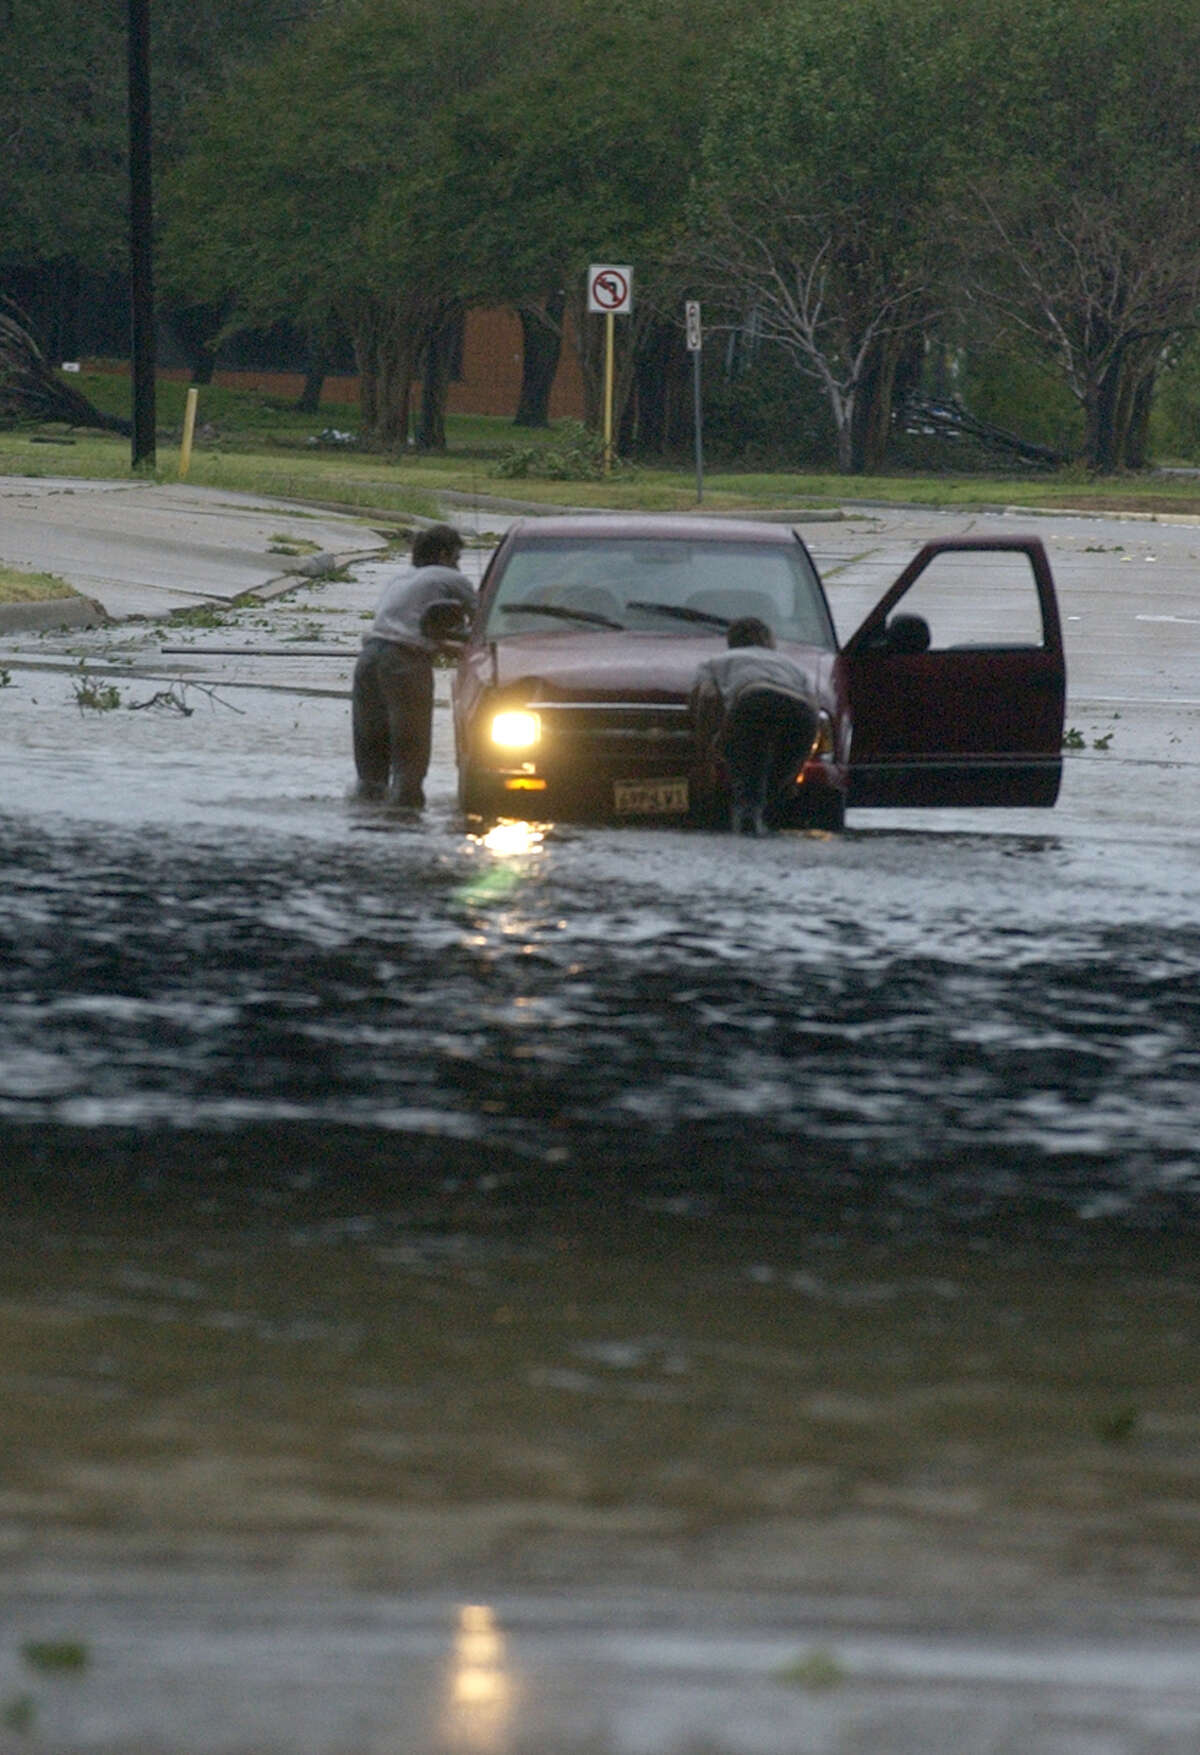 Motorists push their car out of high water under Interstate 10 in Beaumont Saturday September 24, 2005 after Hurricane Rita passed through the area overnight. Many roads were underwater and underpasses where underwater following the storm. Photo/Jennifer Reynolds - The Beaumont Enterprise